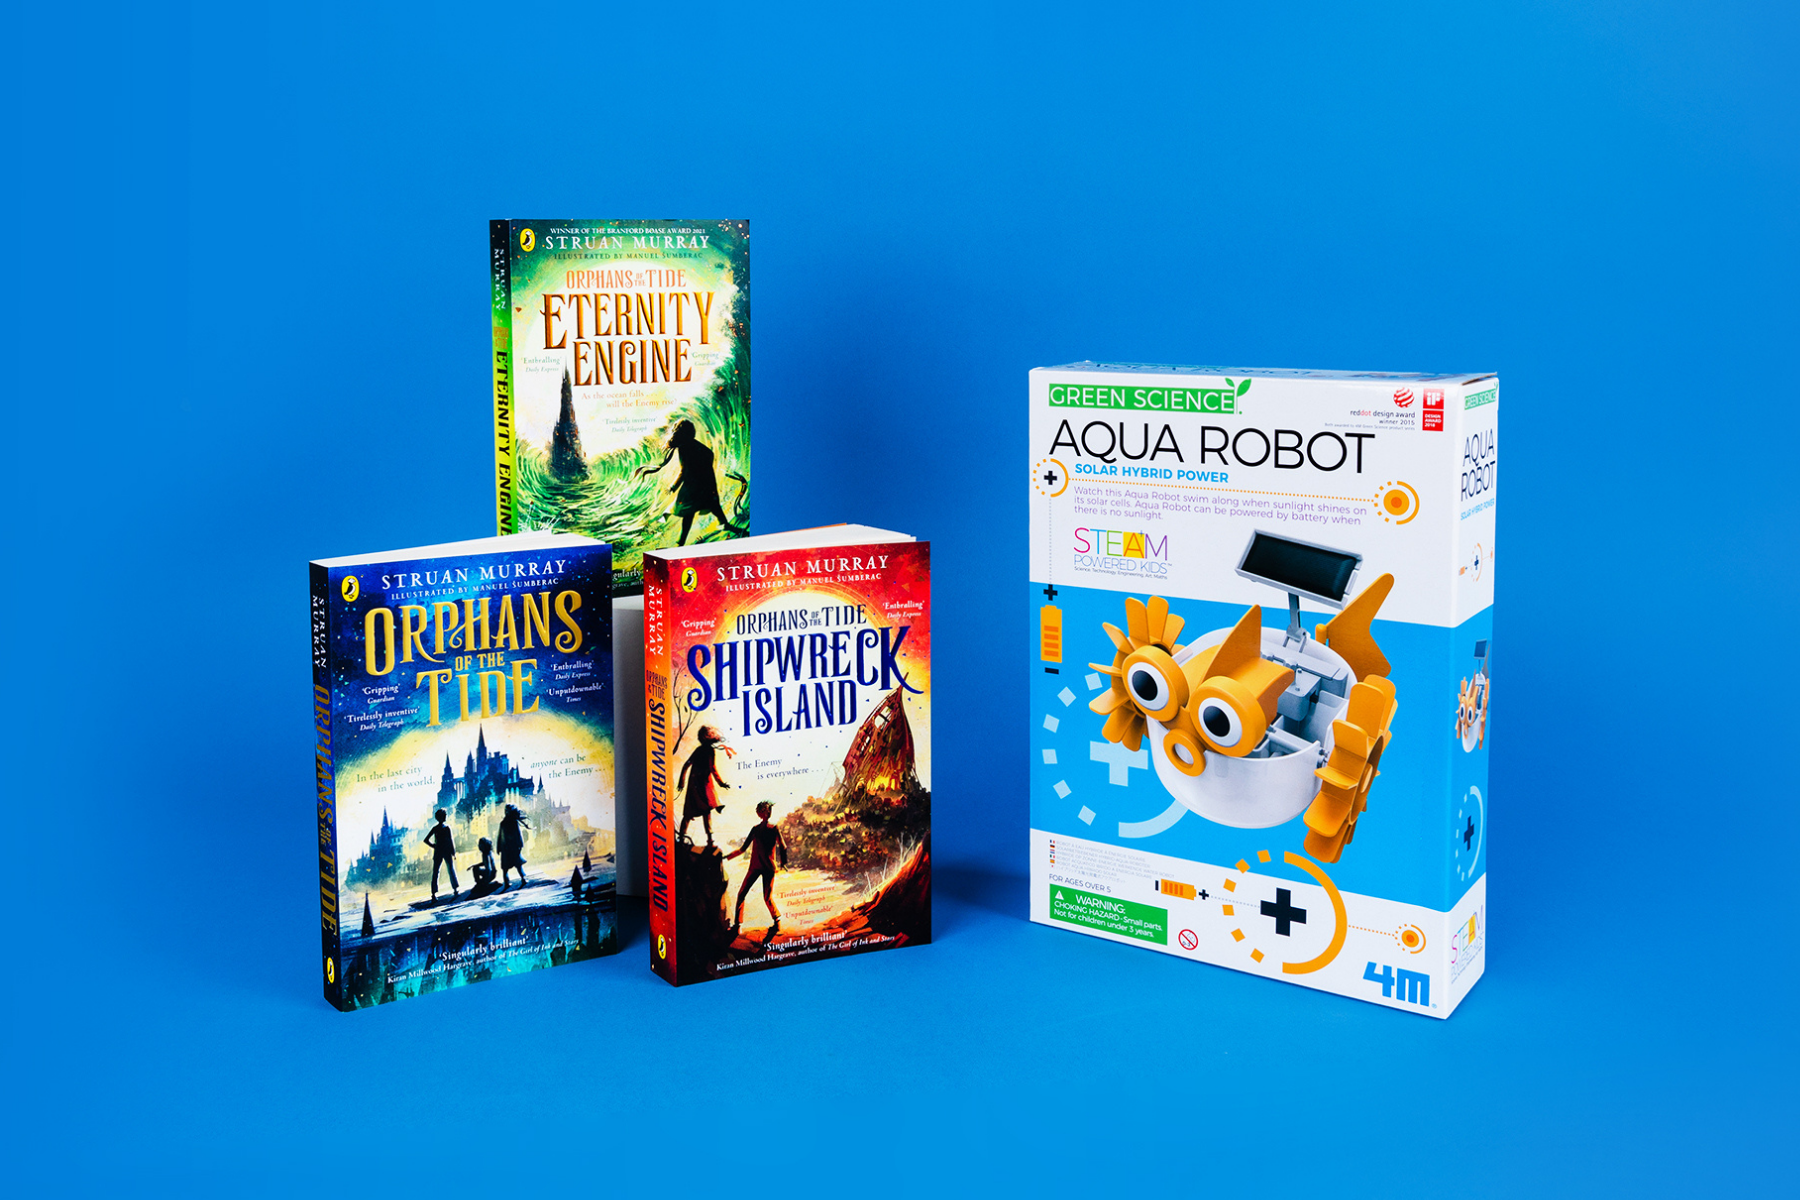 gggA photo of the three books in the Orphans of the Tide series next to an invention kit against a blue background